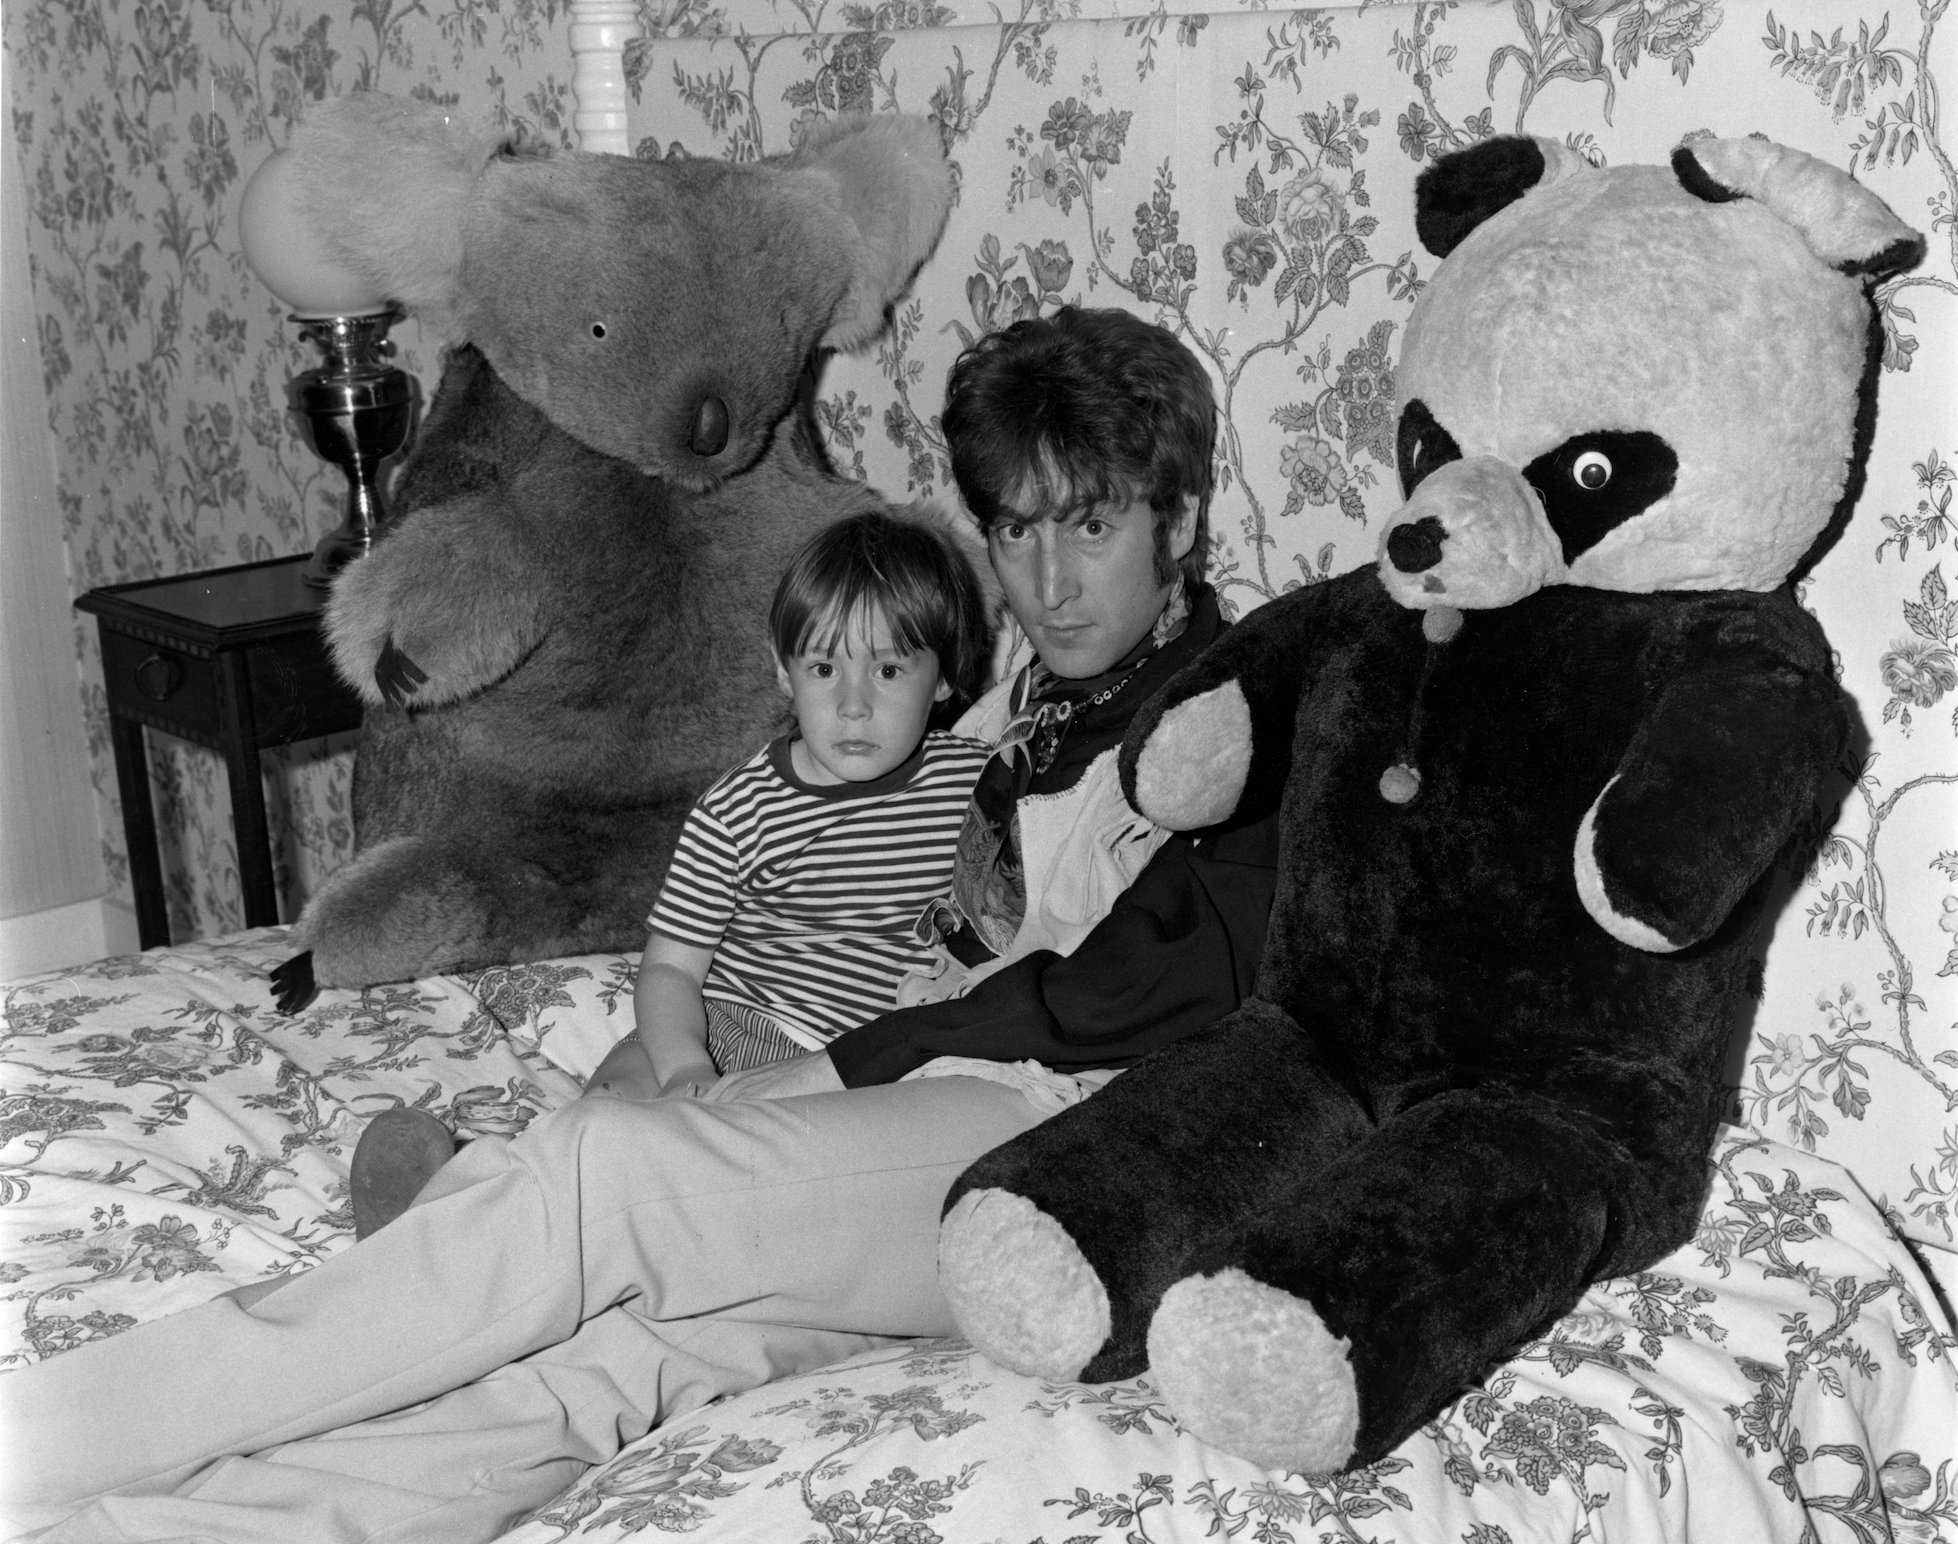 John Lennon of The Beatles and his son, Julian, at their home in Weybridge